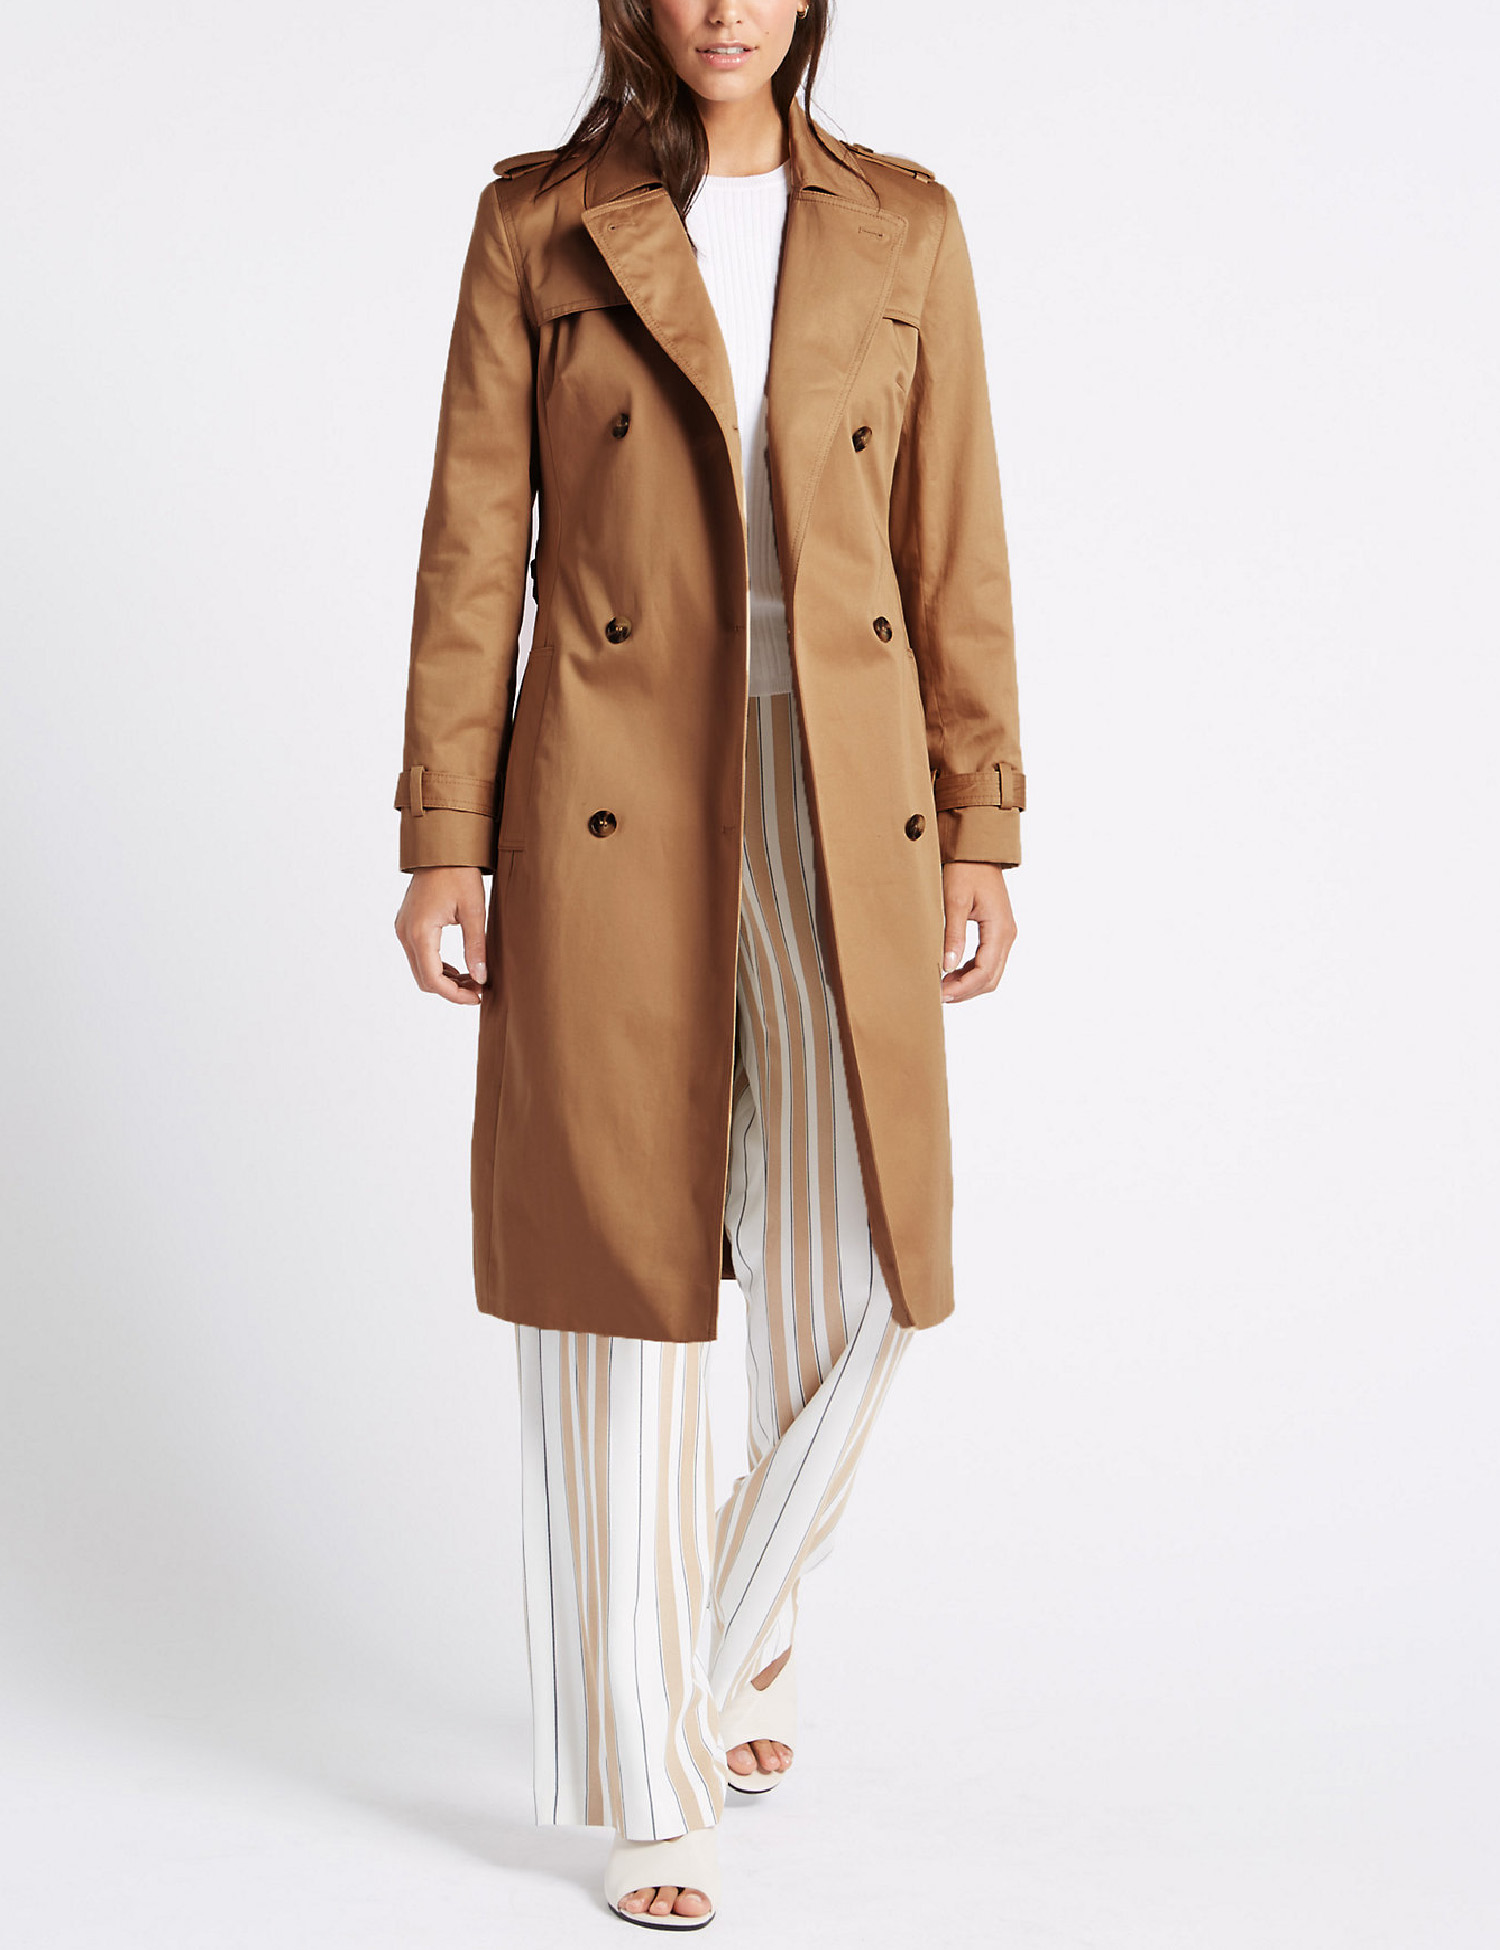 Marks and Spencer - - M&5 SANDSTONE Pure Cotton Longline Trench Coat ...